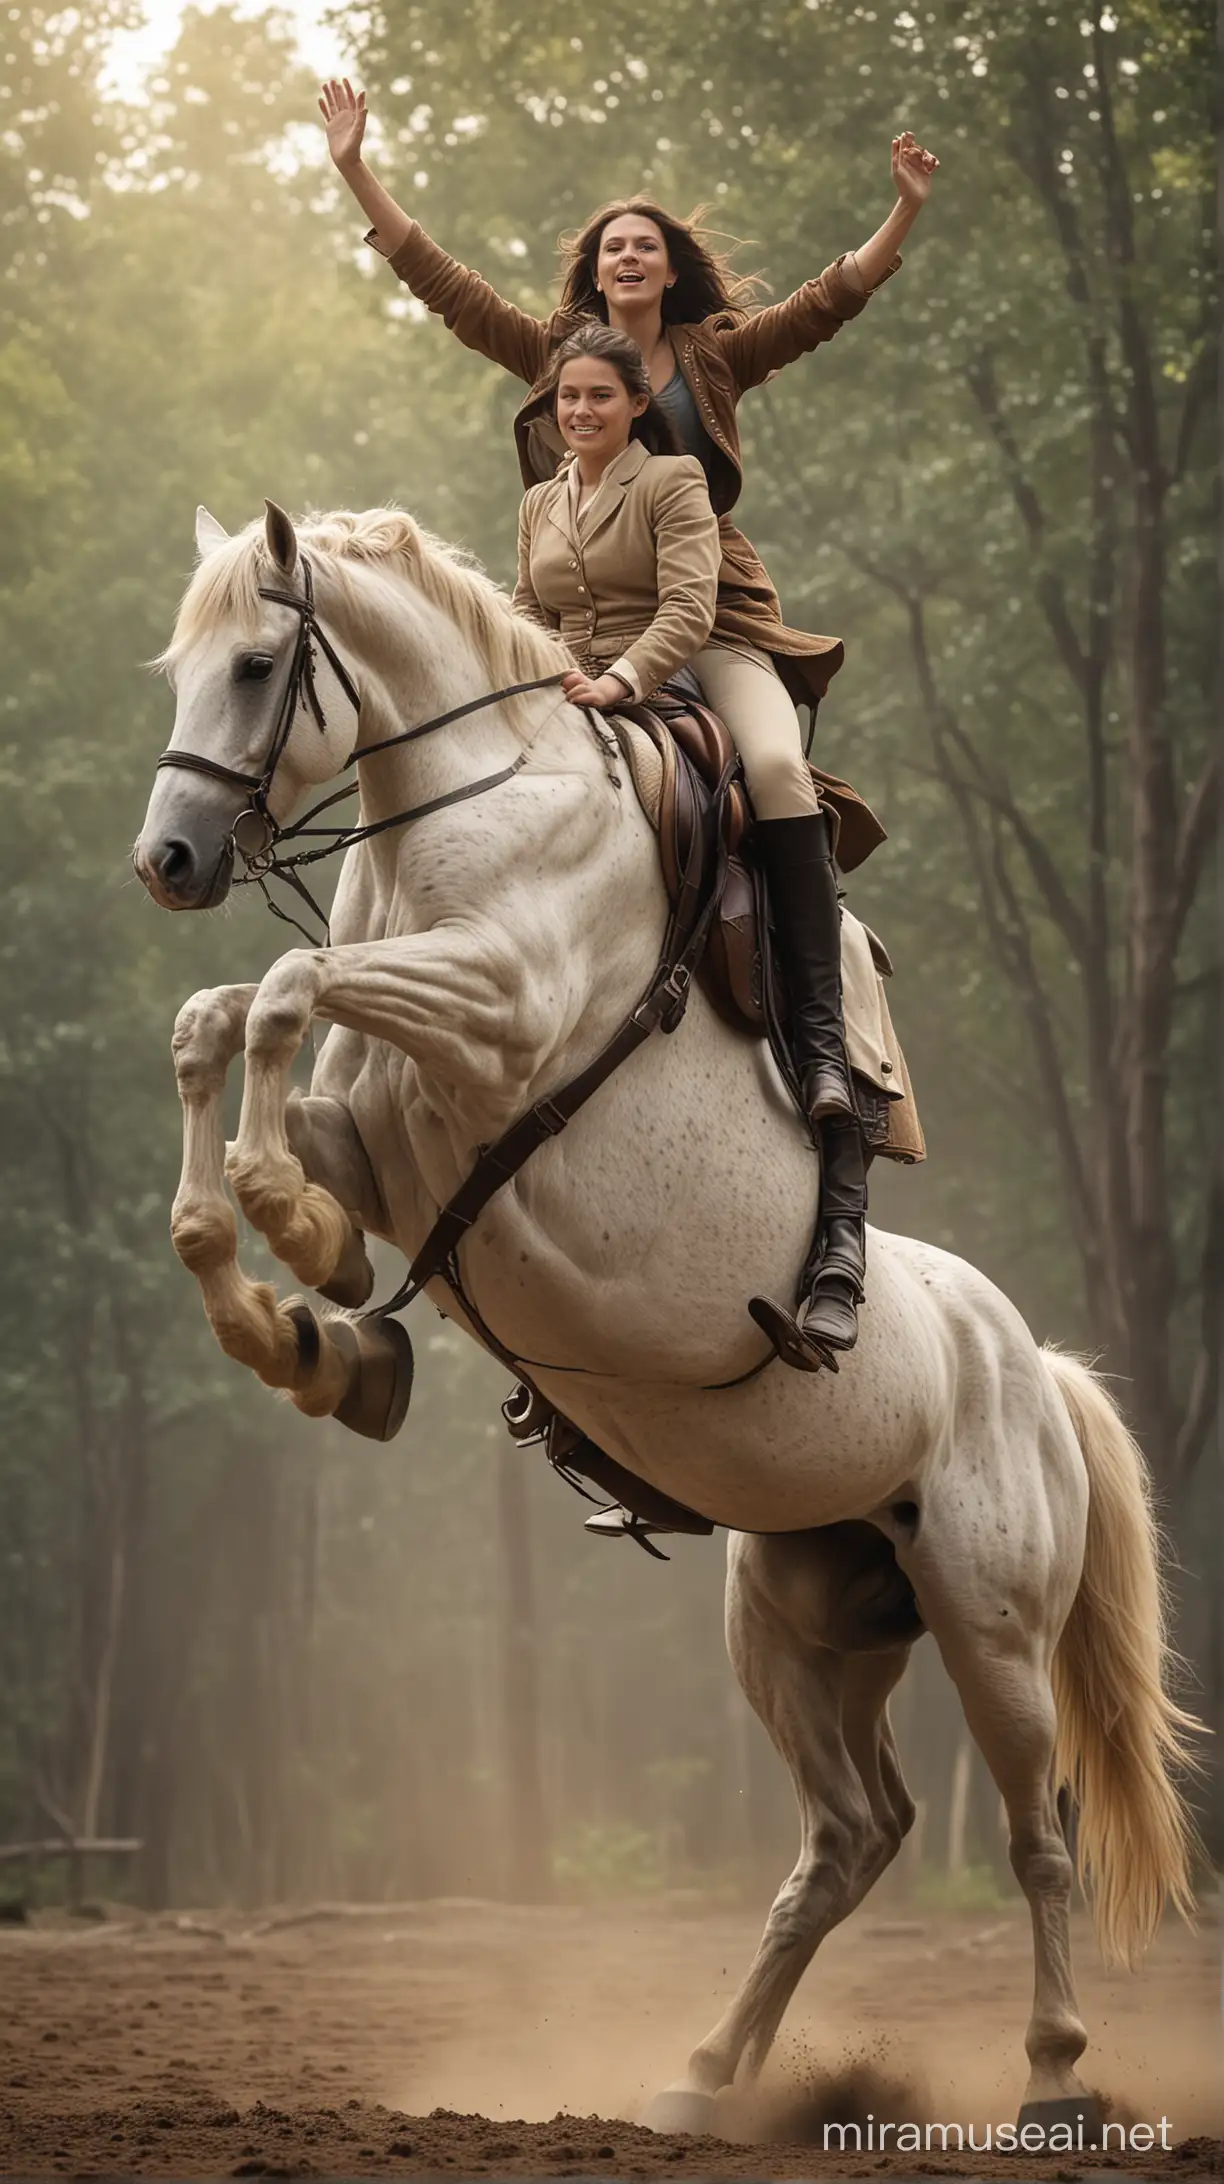 the lady tall and boy ride horse, the horse's legs are in the air and that lady sitting on it, and the boy is holding onto the horse, and maybe he can even sit with the lady. But I'd say, to create an incredible scene, horse showing some crazy action would make it amazing